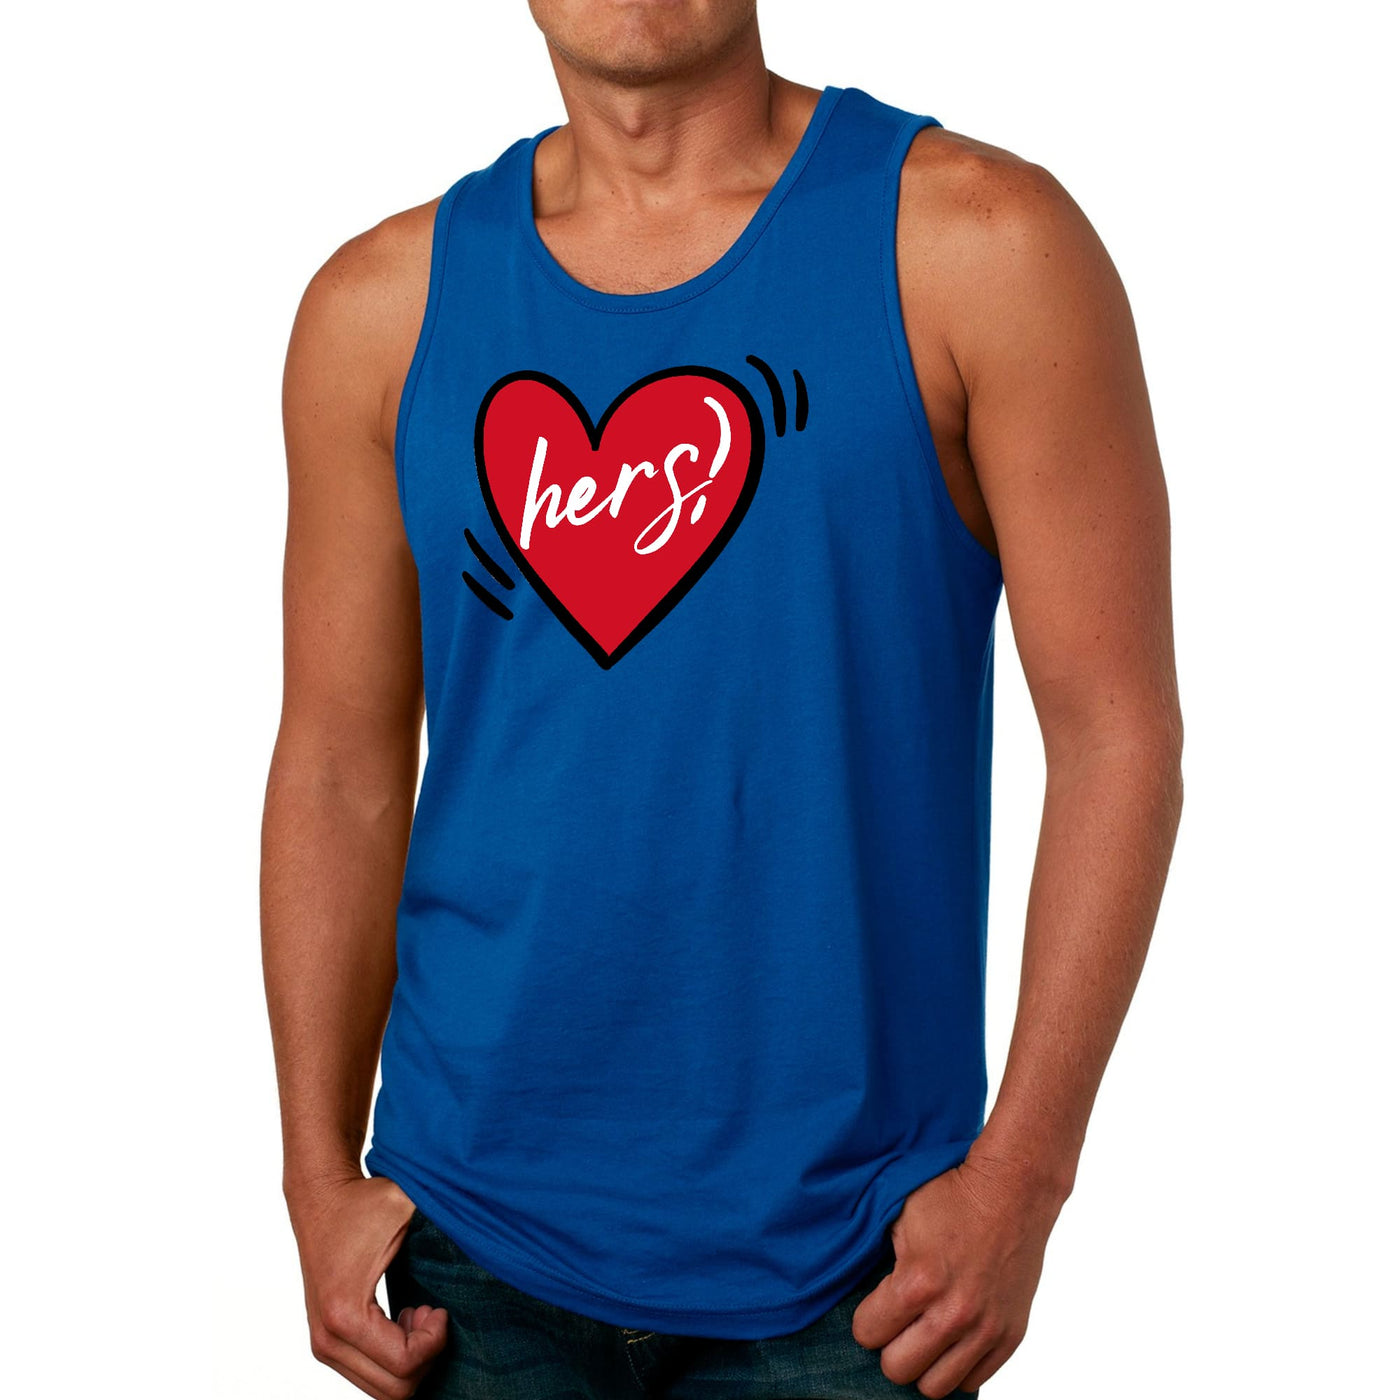 Mens Tank Top Fitness Shirt Say It Soul Her Heart Couples - Mens | Tank Tops